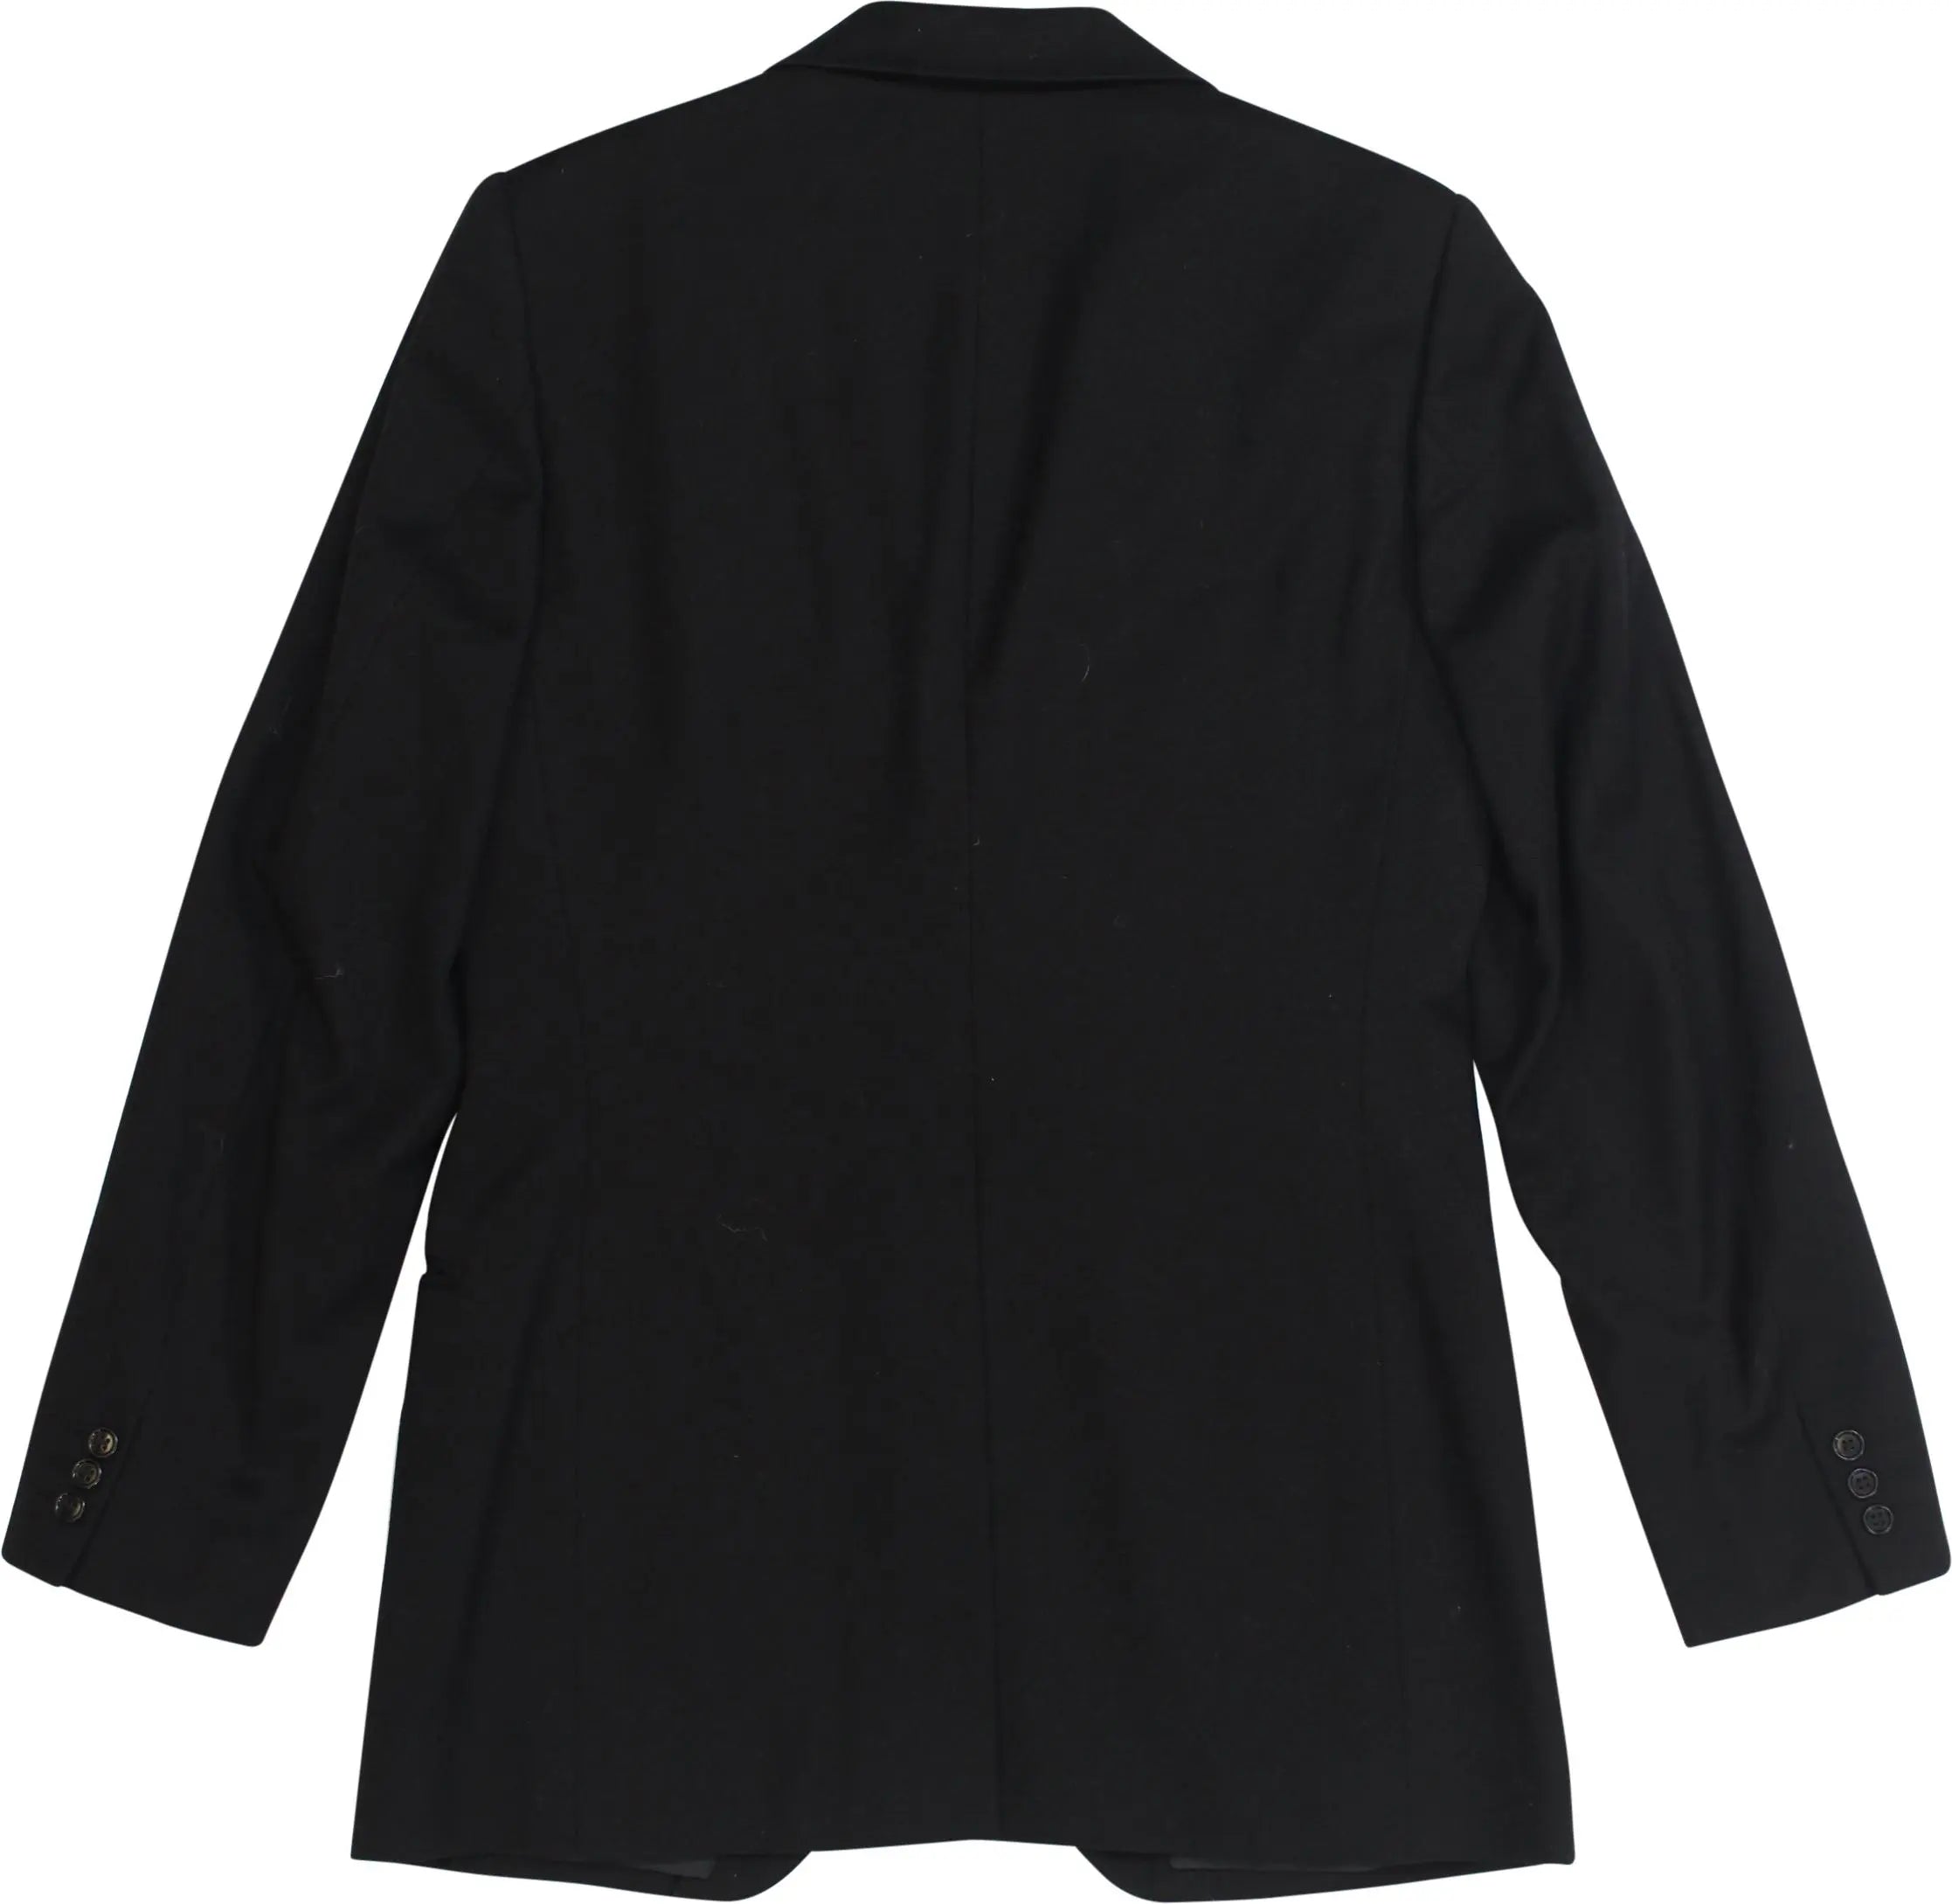 Baronet - Black Blazer by Baronet- ThriftTale.com - Vintage and second handclothing